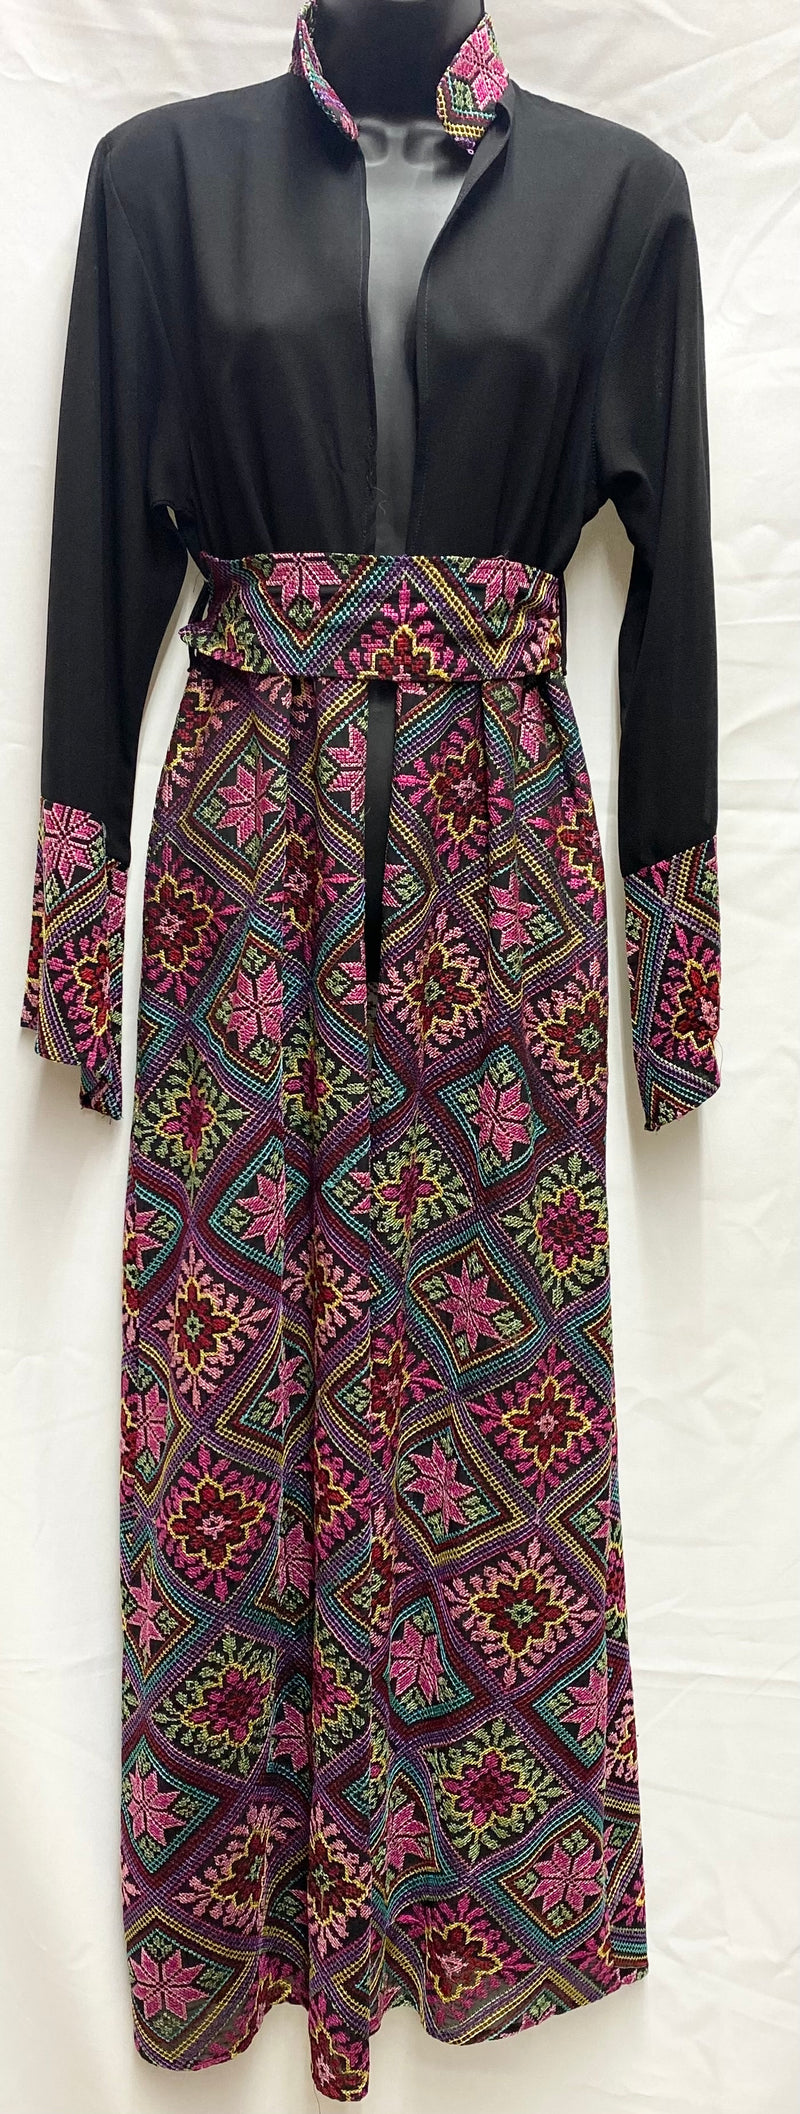 Chiffon Fully embroidered under the waist long jacket Black with multi color stitching size[3]